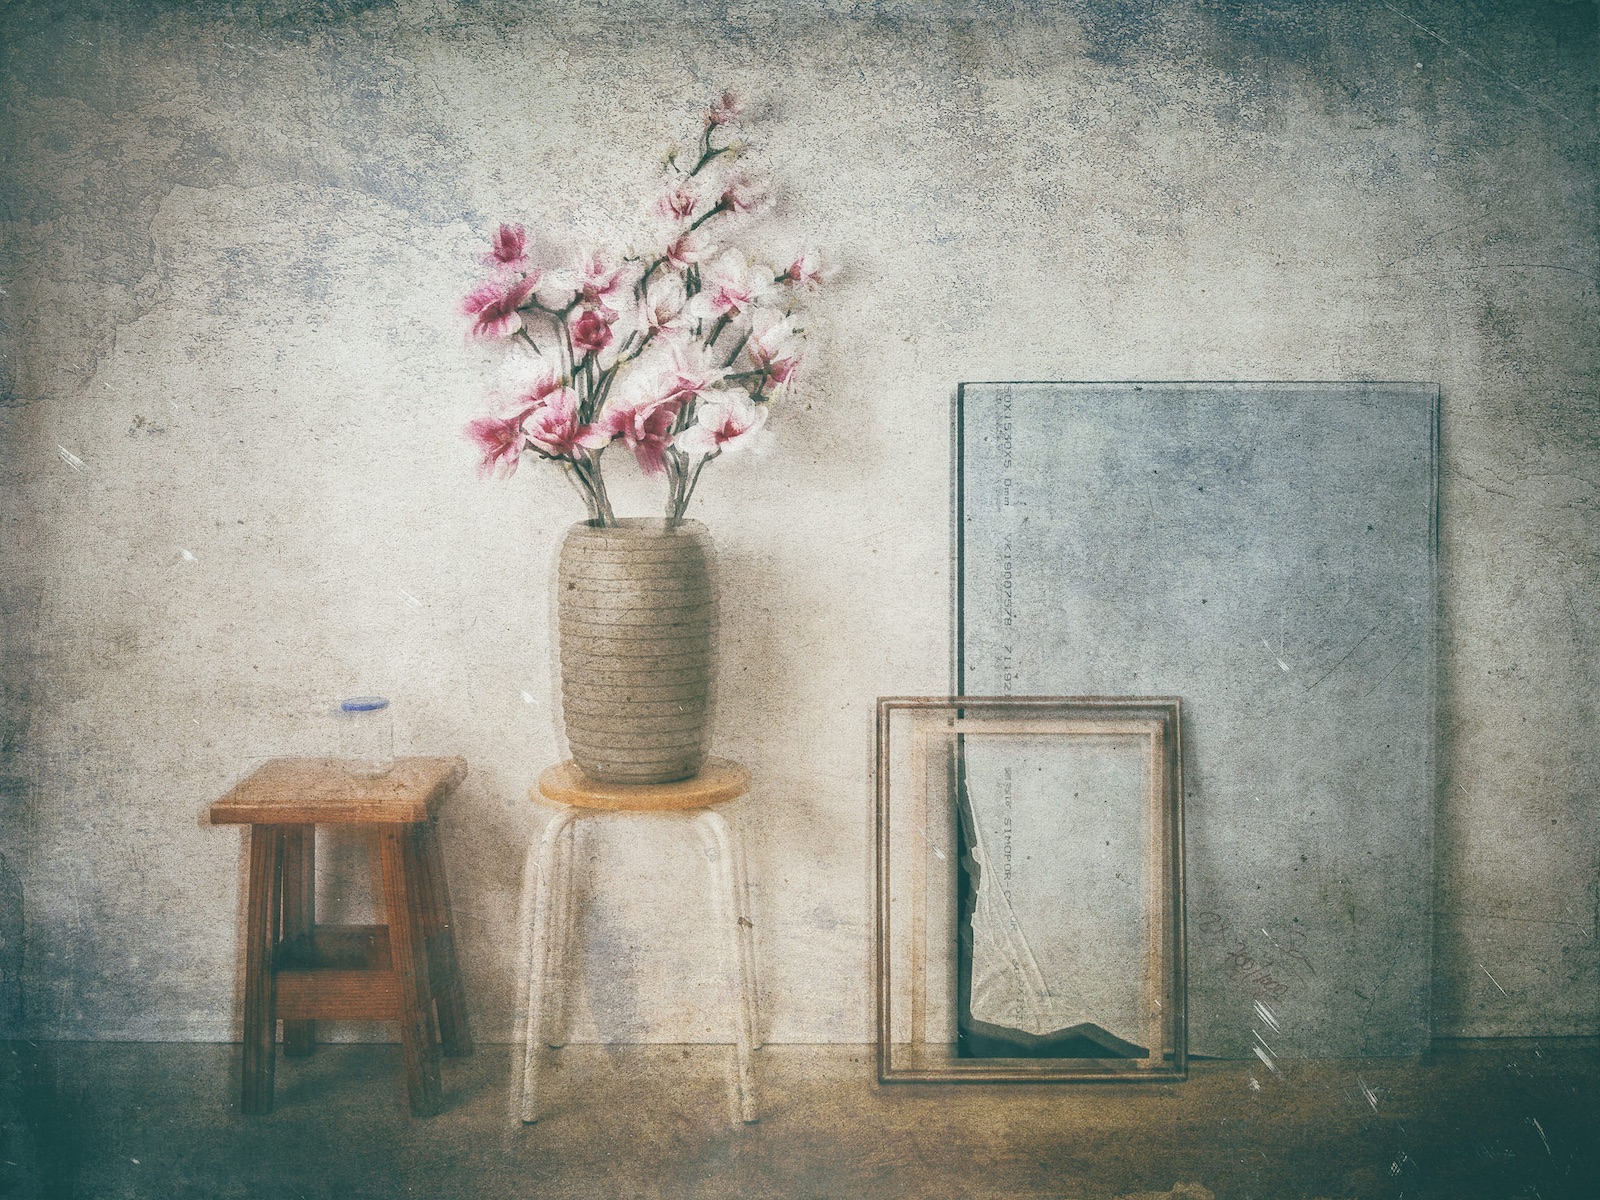 Studio Wall With Jar And Magnolia - ICM photograph by Martin Nienberg